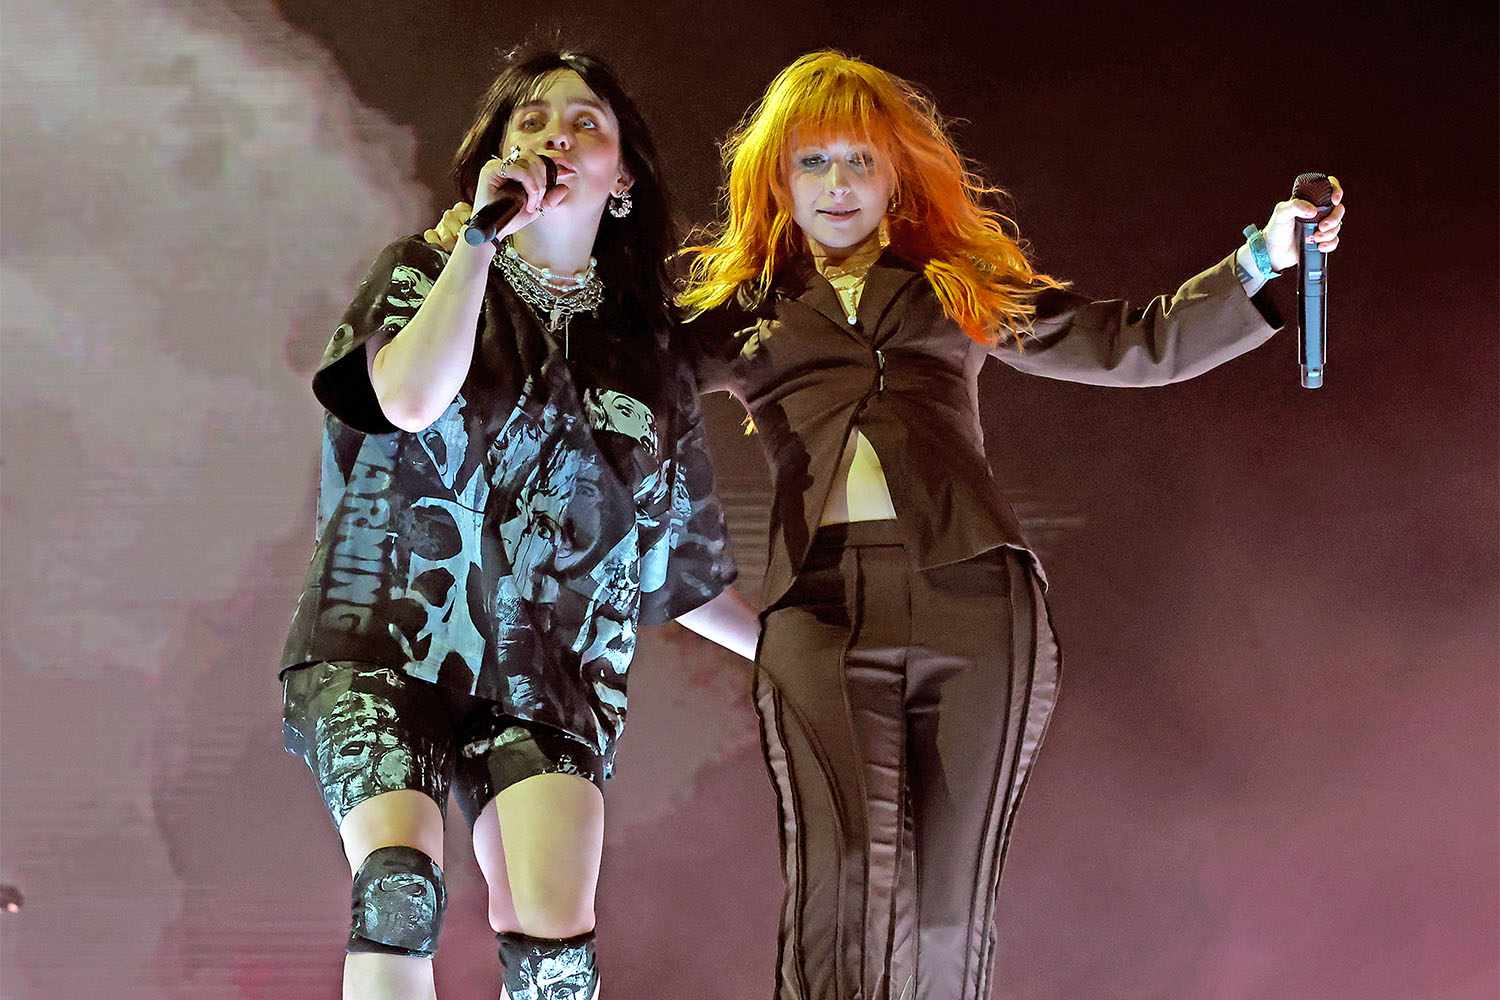 Billie Eilish Duets with Hayley Williams at Coachella in Surprise  Appearance | PEOPLE.com